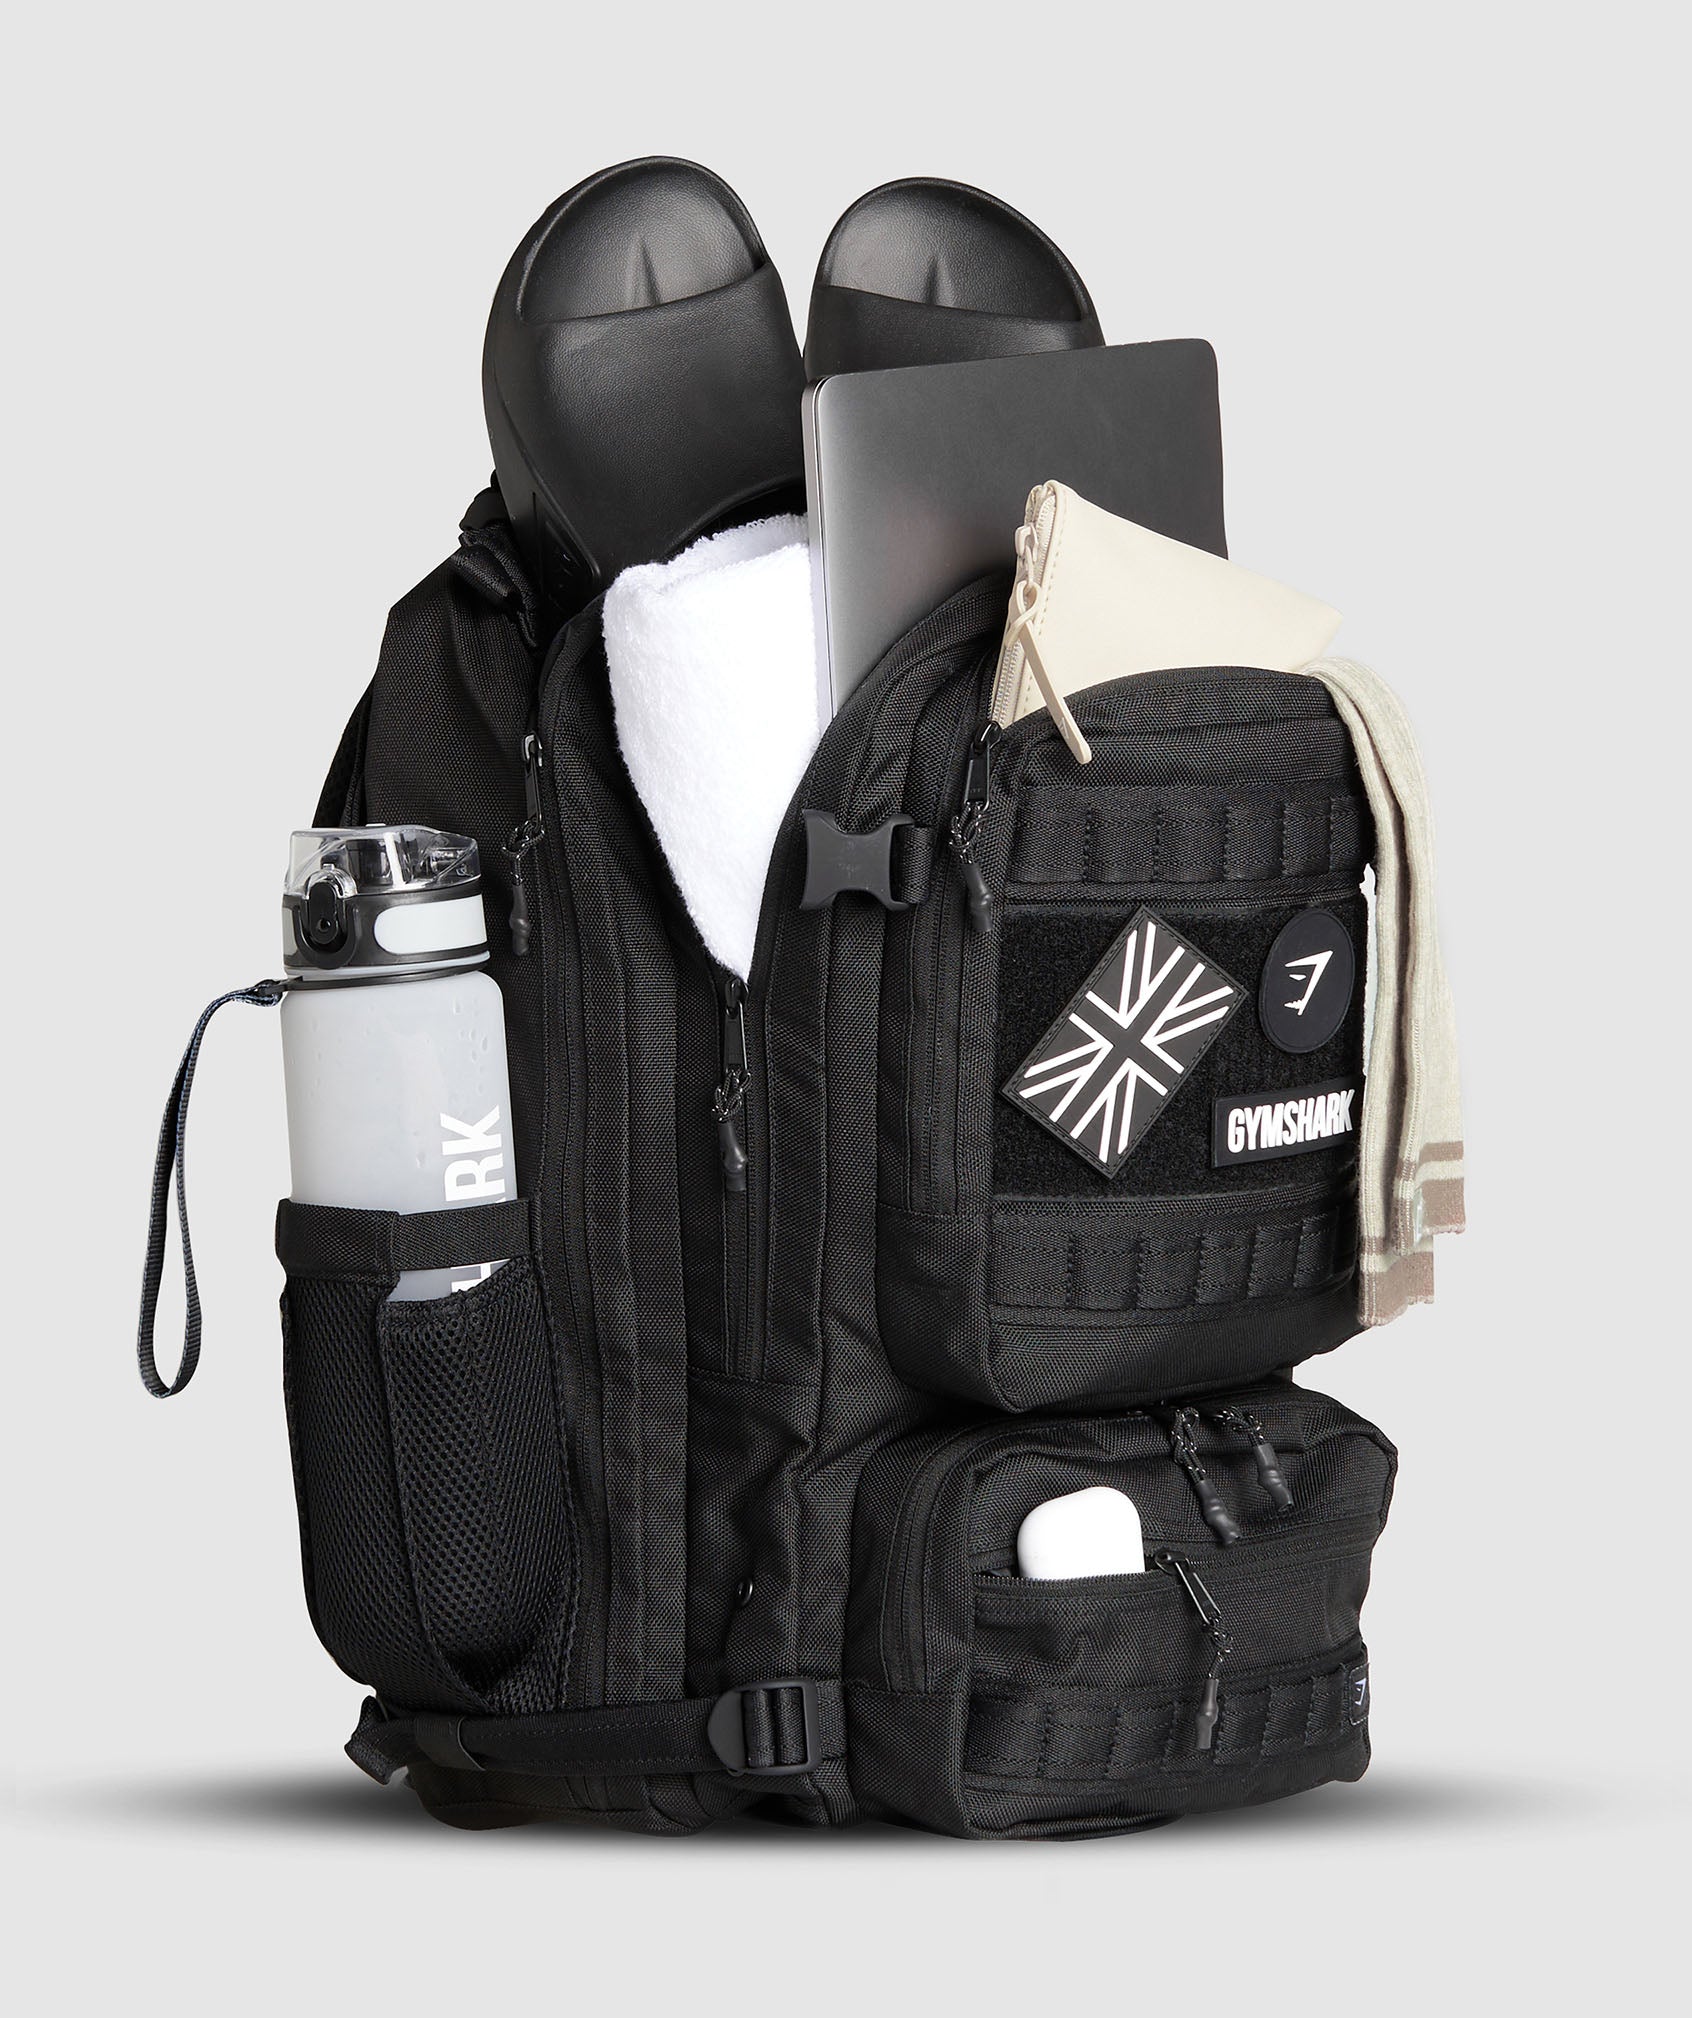 Tactical Backpack in Black - view 5